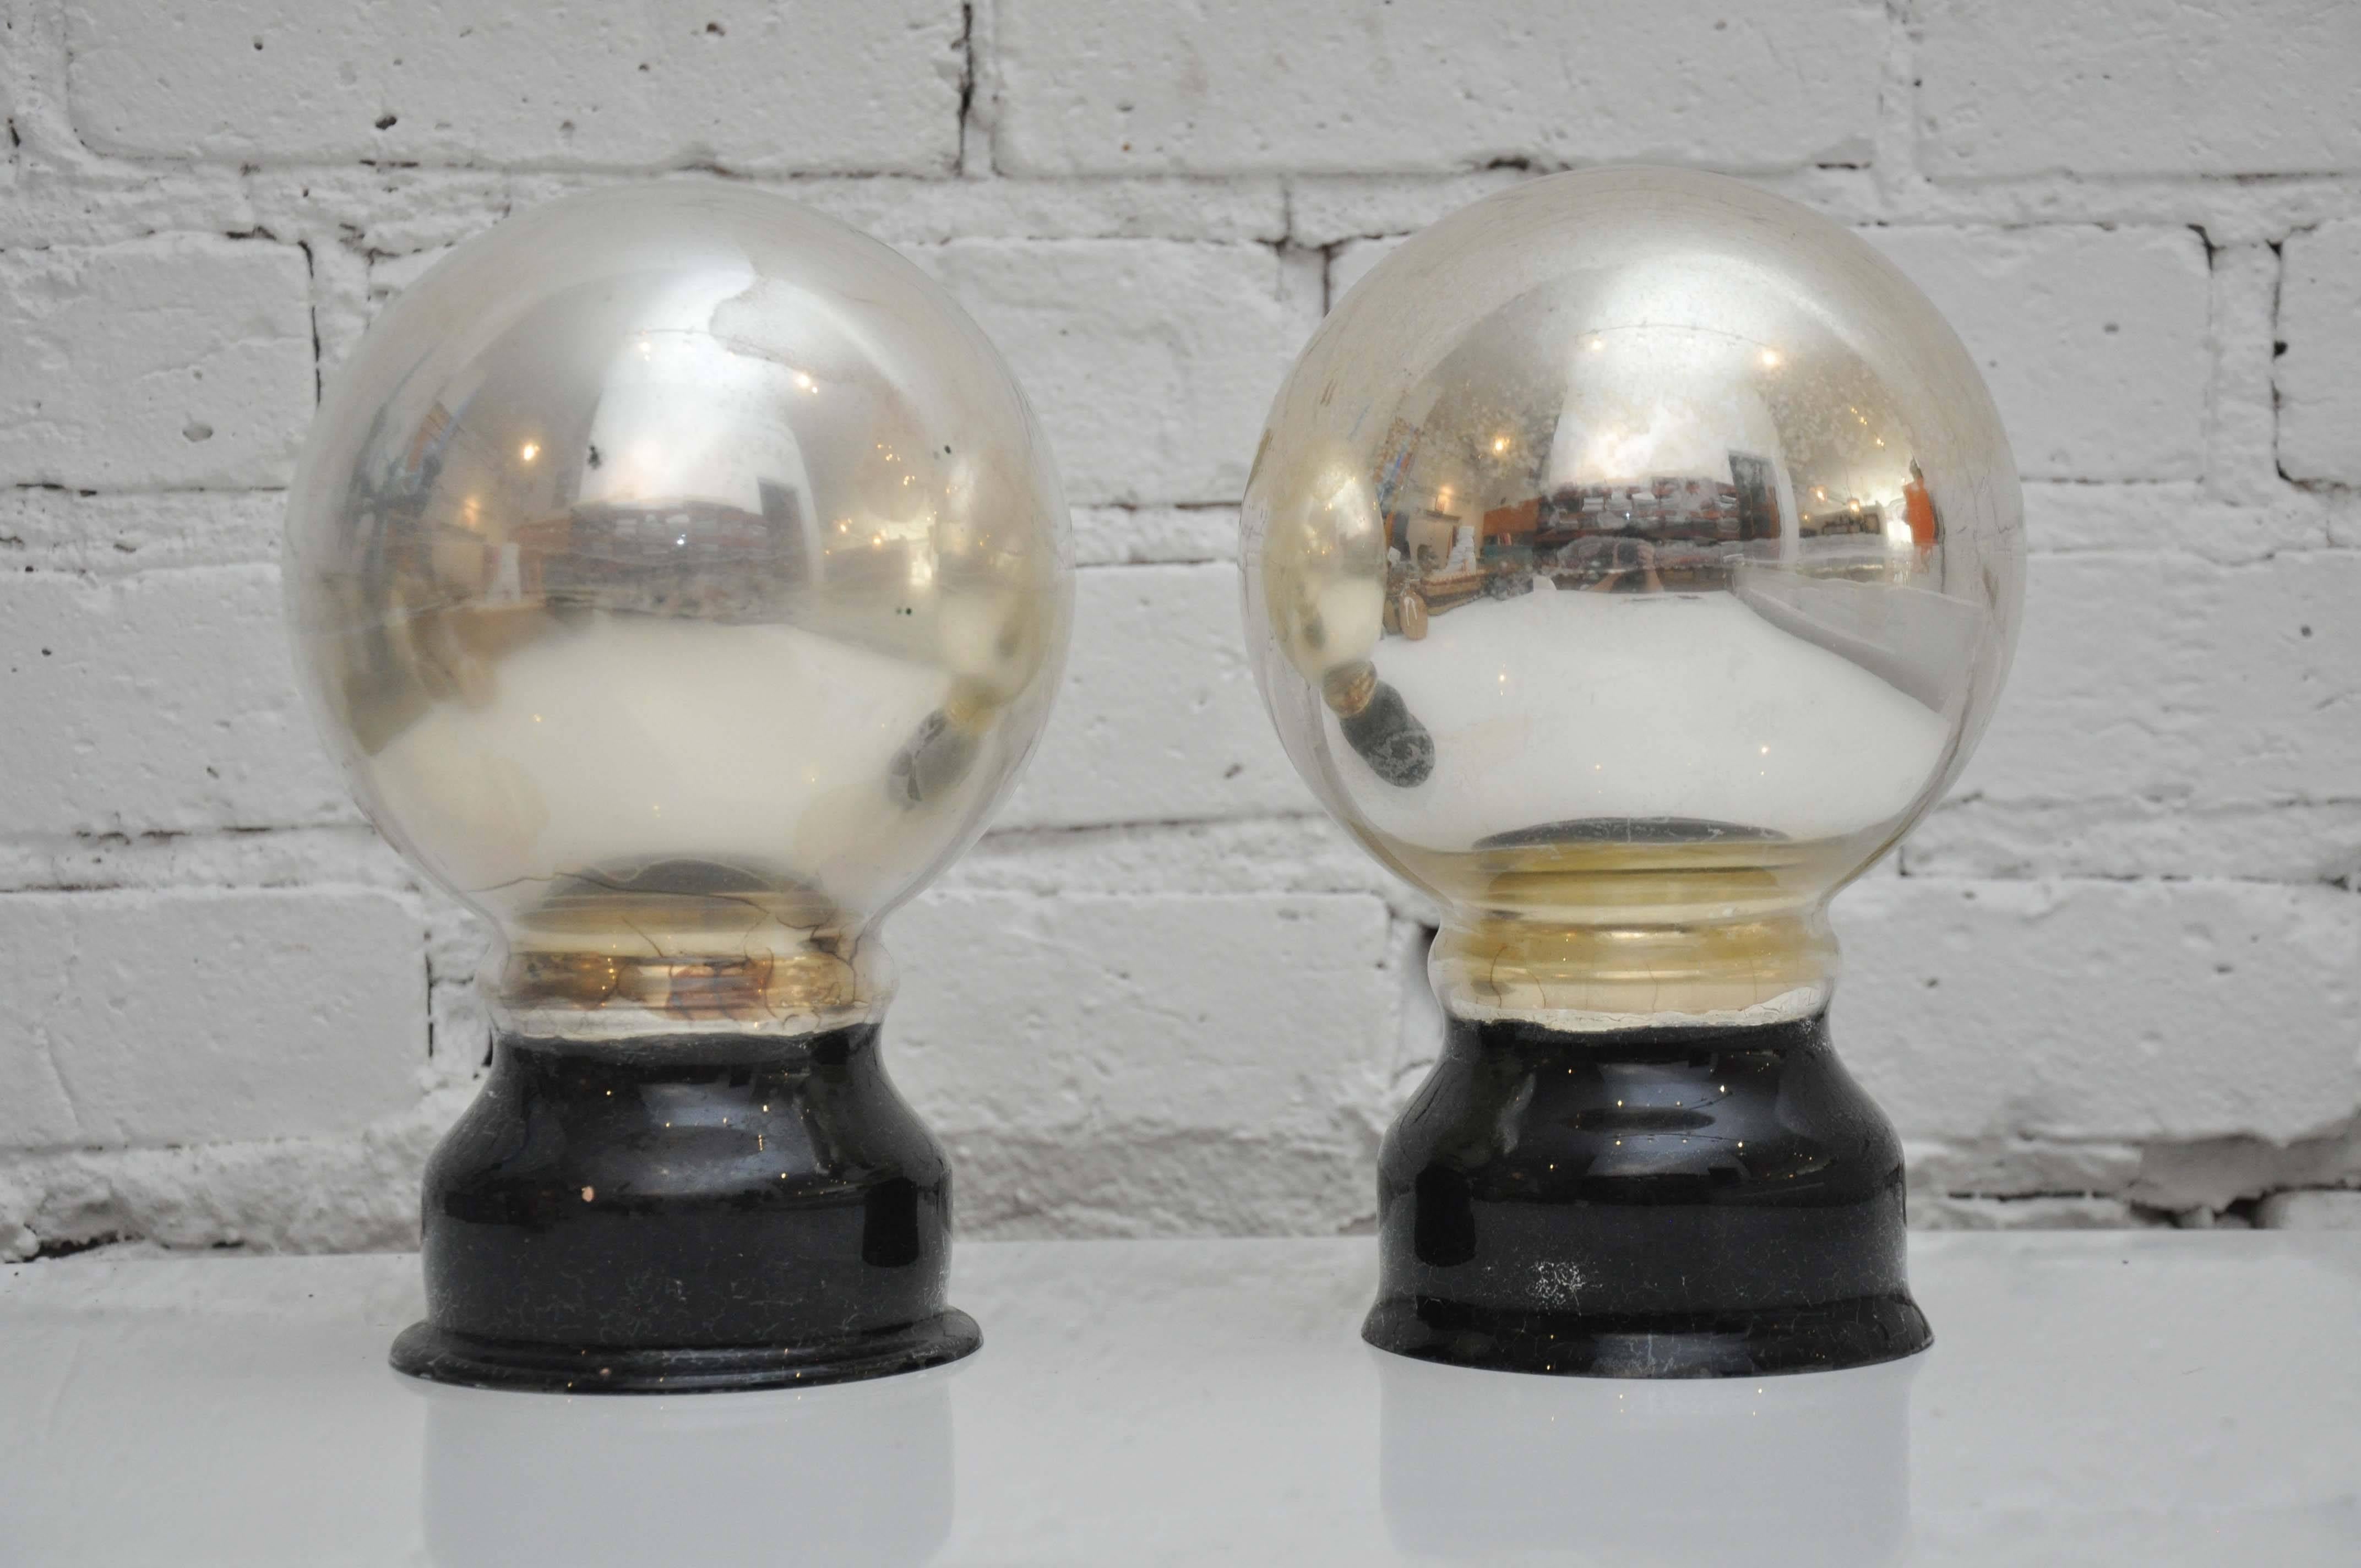 Old and rare pair of Butler's balls, promise they are a thing! Placed on a mantel the Lord or Lady of the house would raise their hands to signal for attention from the Butler who was poised and waiting to notice the reflection in the mercury glass.